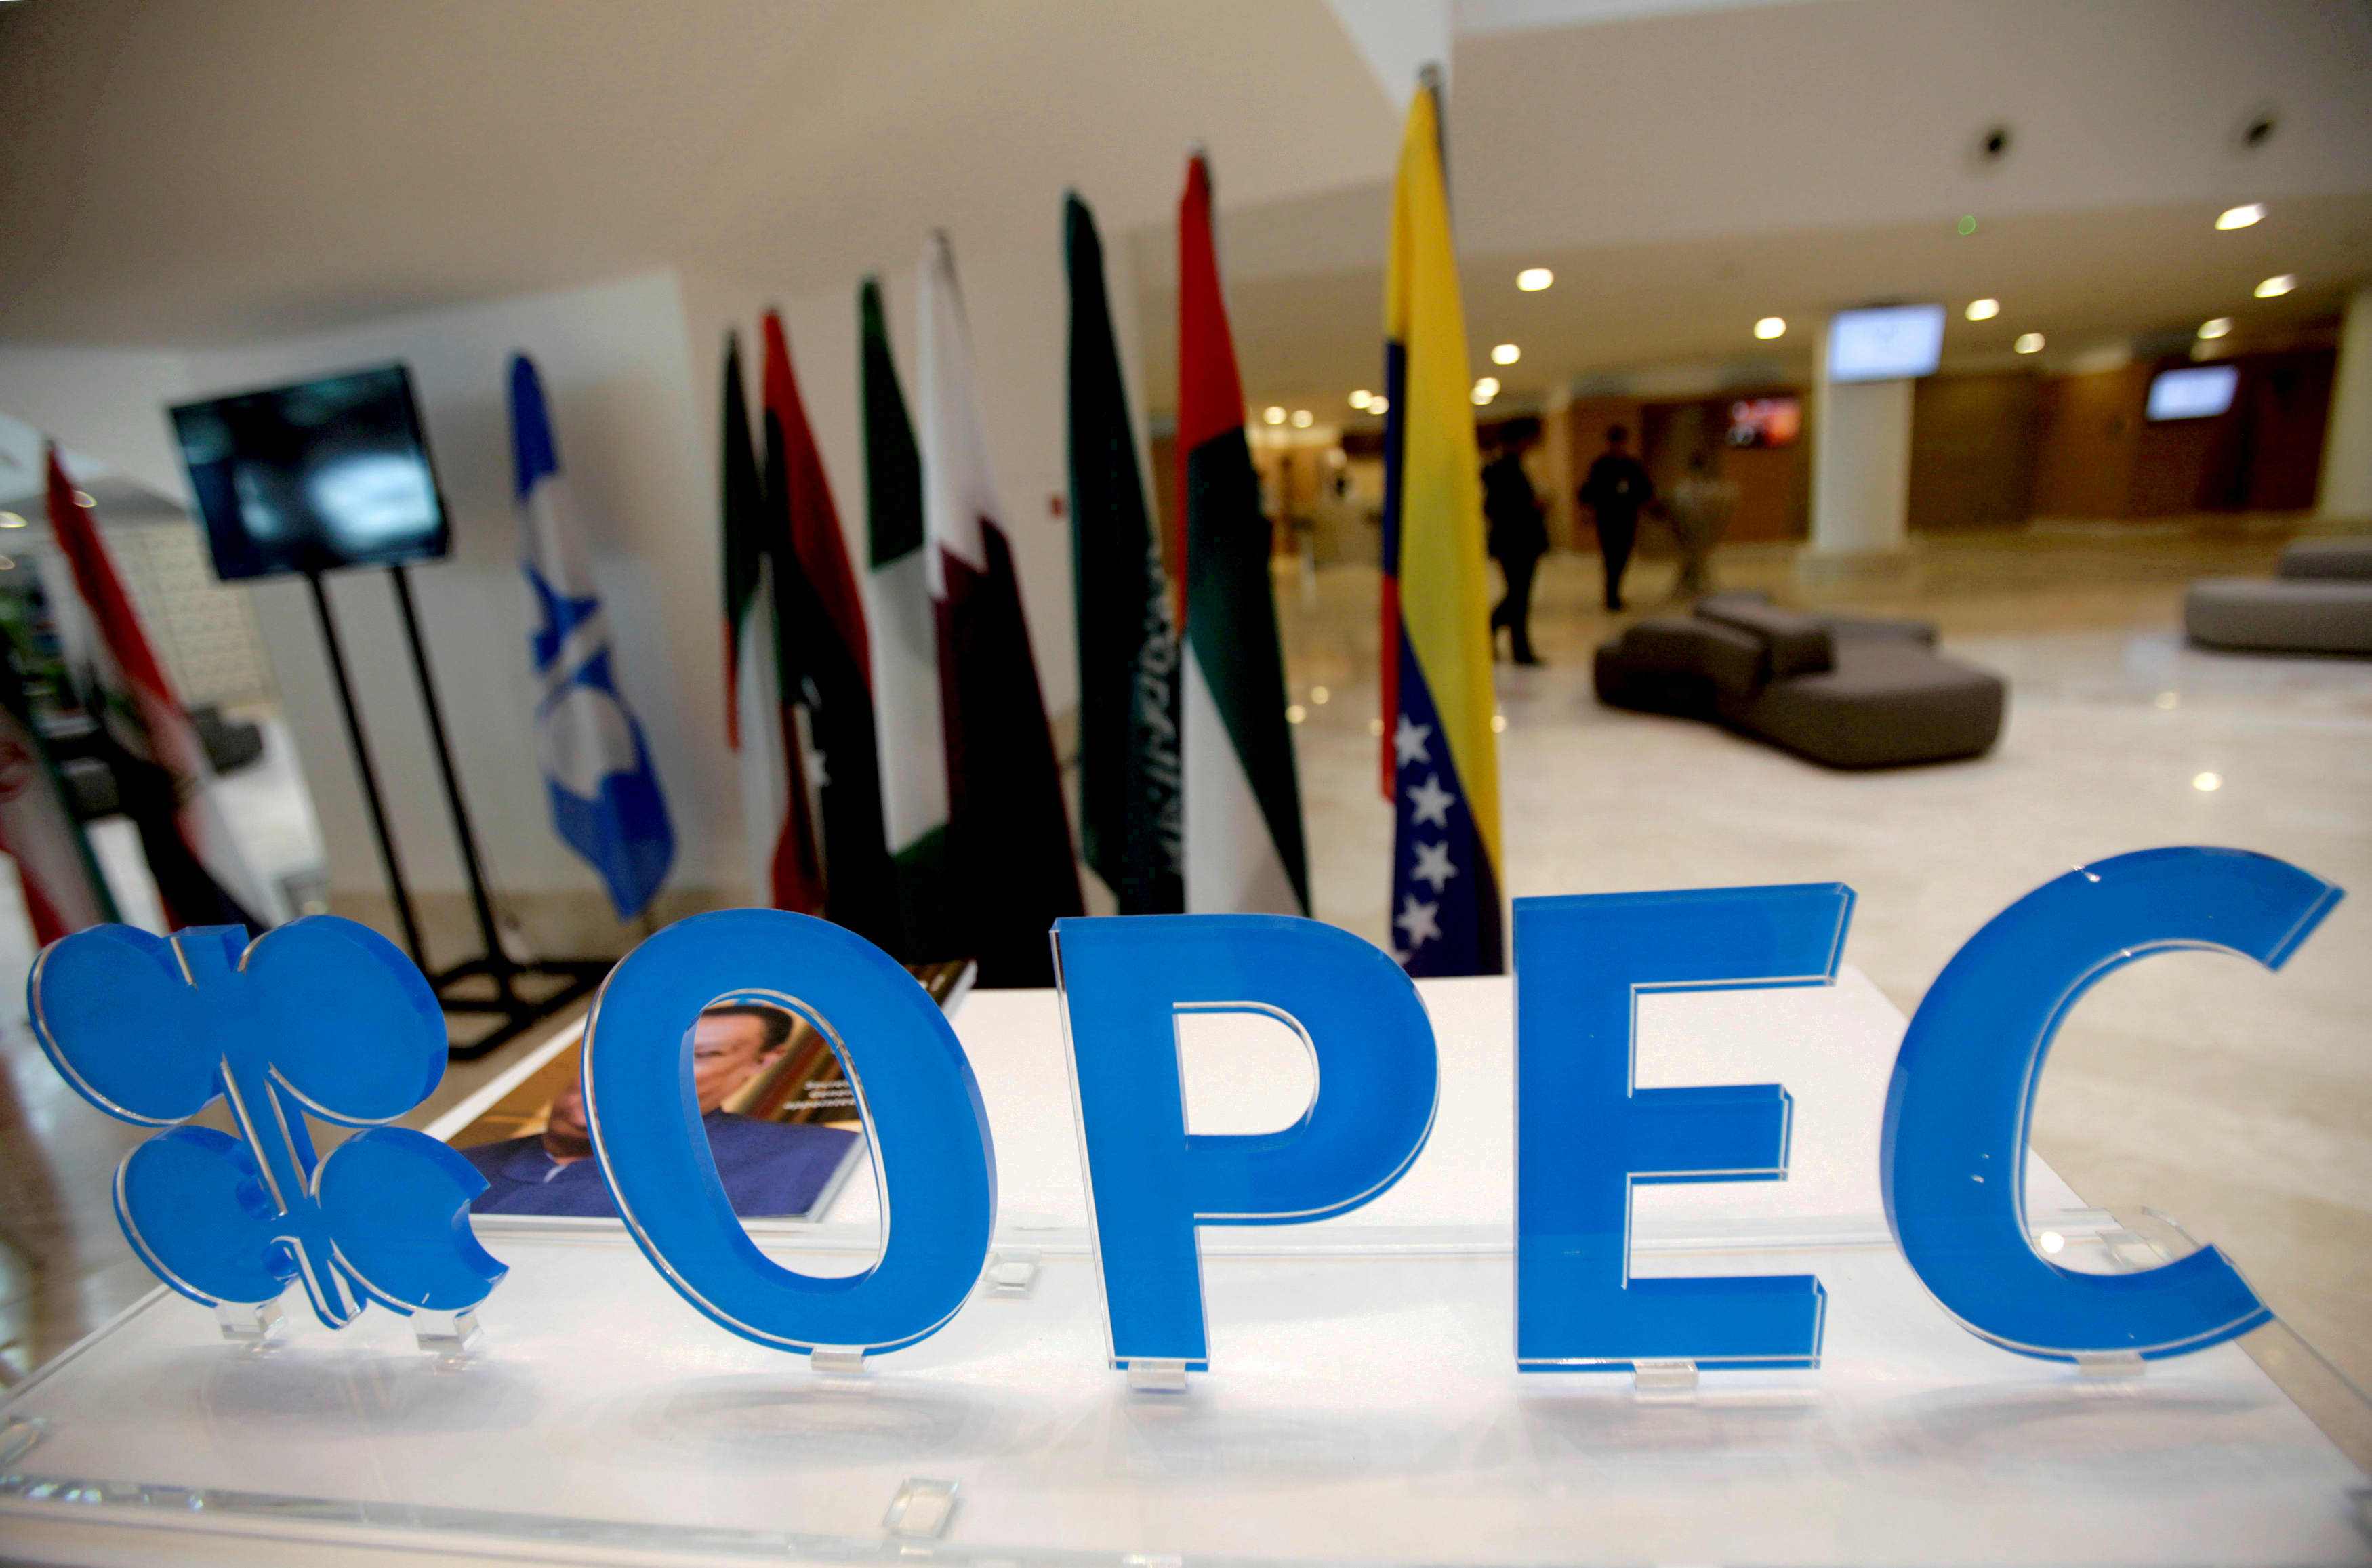 According to reports, OPEC reached a compromise on oil production after a dispute with the UAE